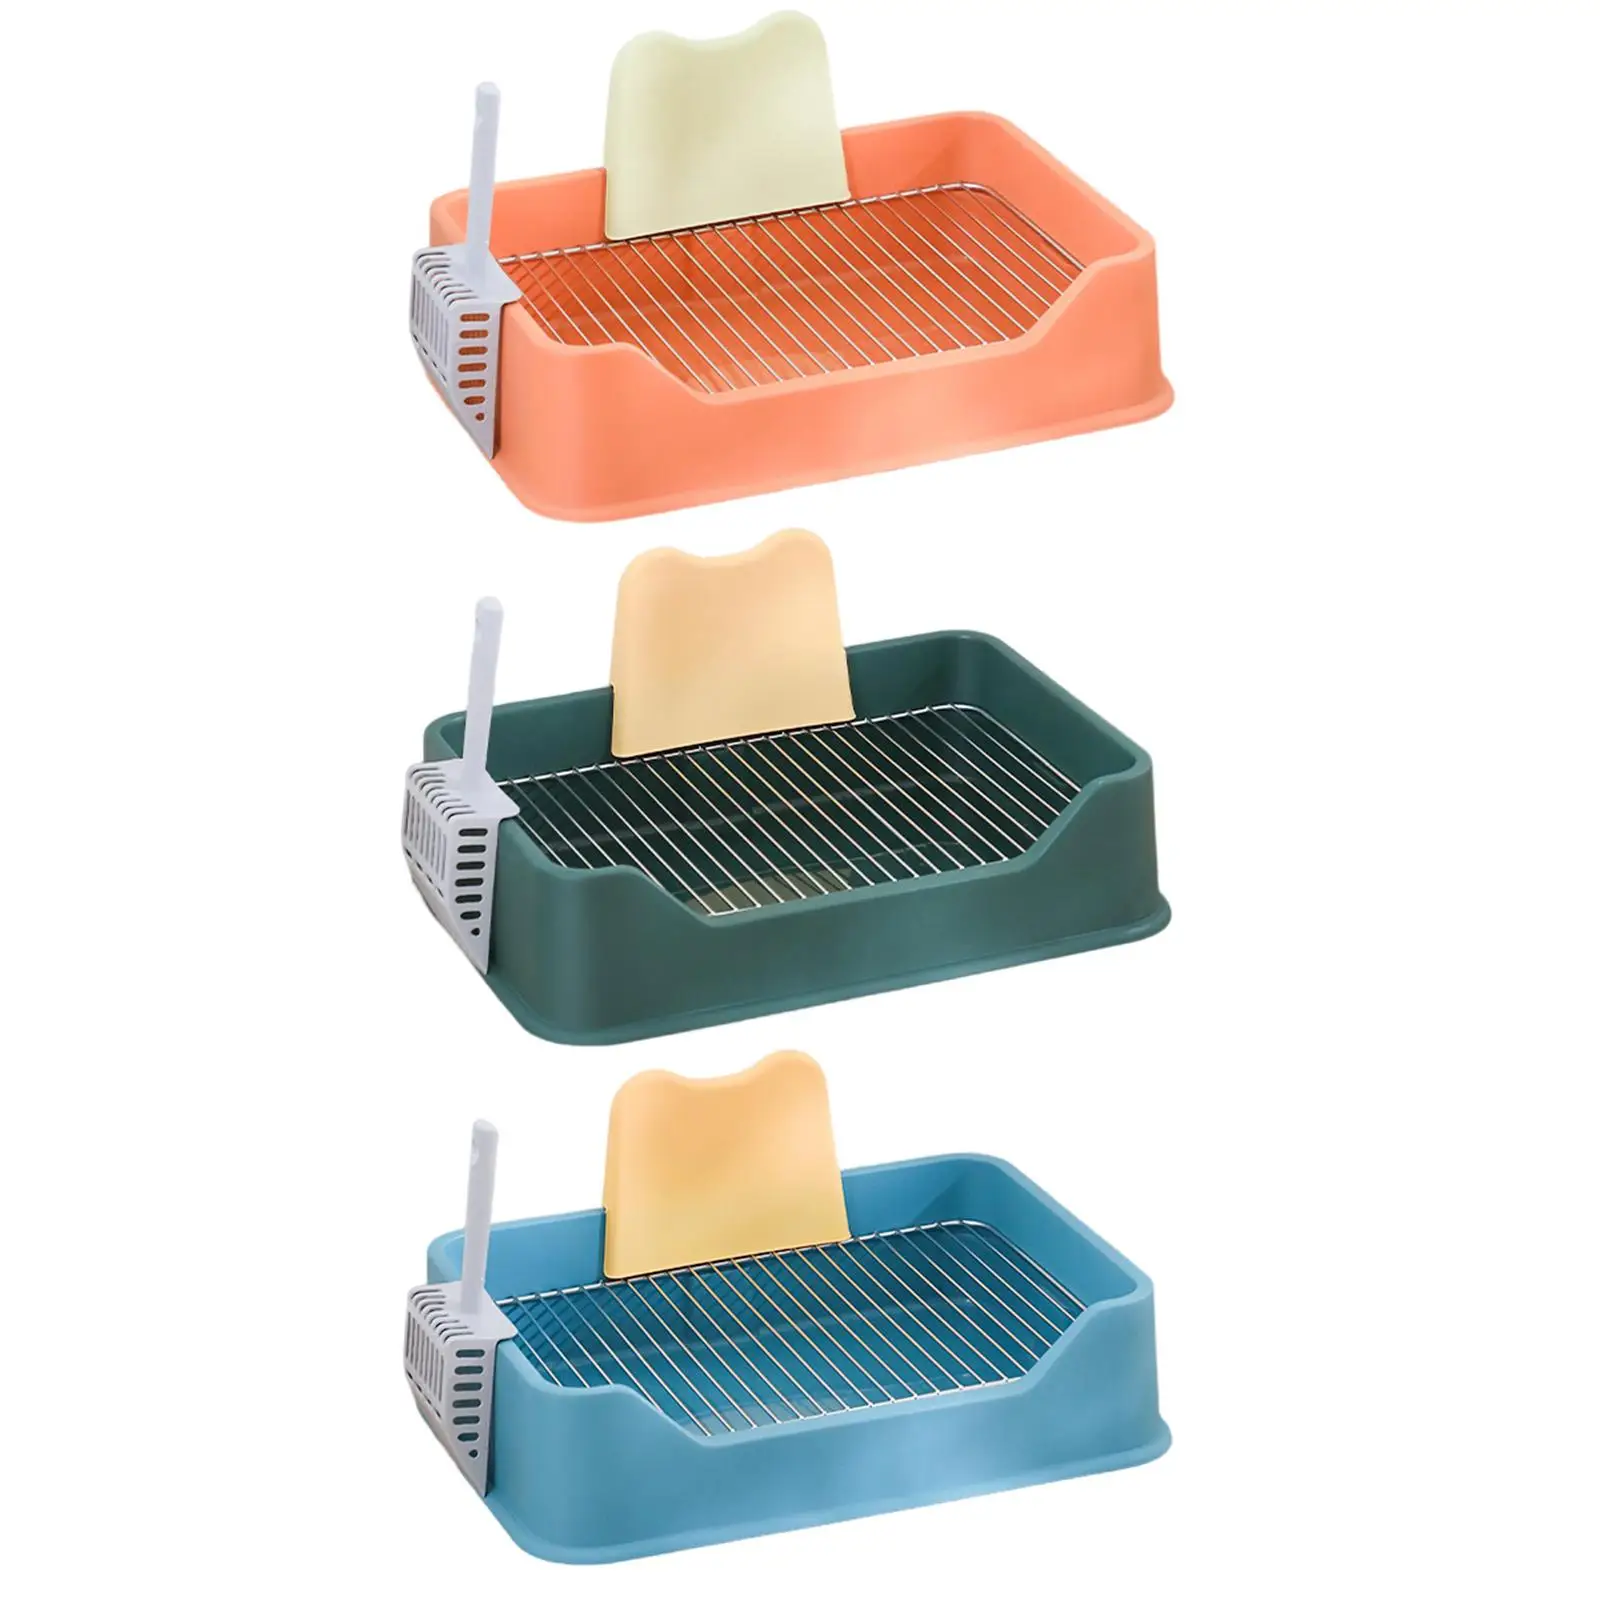 Pet Dog Toilet Puppy Training Potty Tray Potty Pan Reusable for Indoor Cats Pet